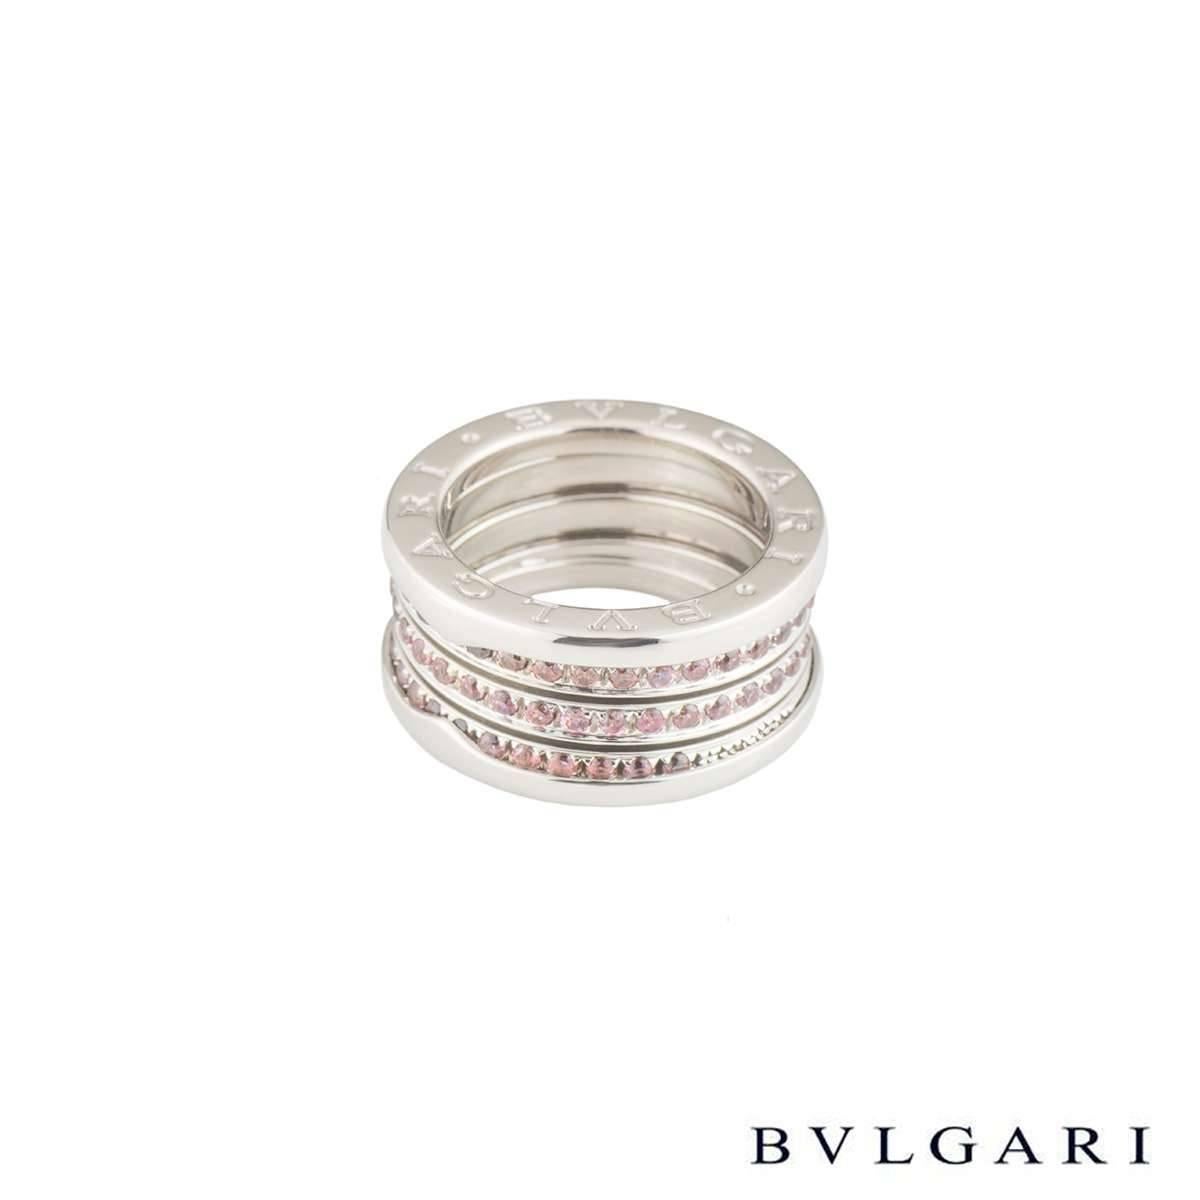 An 18k white gold pink sapphire B.zero1 ring by Bvlgari. The ring is composed of the signature spirals running through the centre, each pave set with round cut pink sapphires totalling approximately 1.24ct. The pink sapphires lead on to two